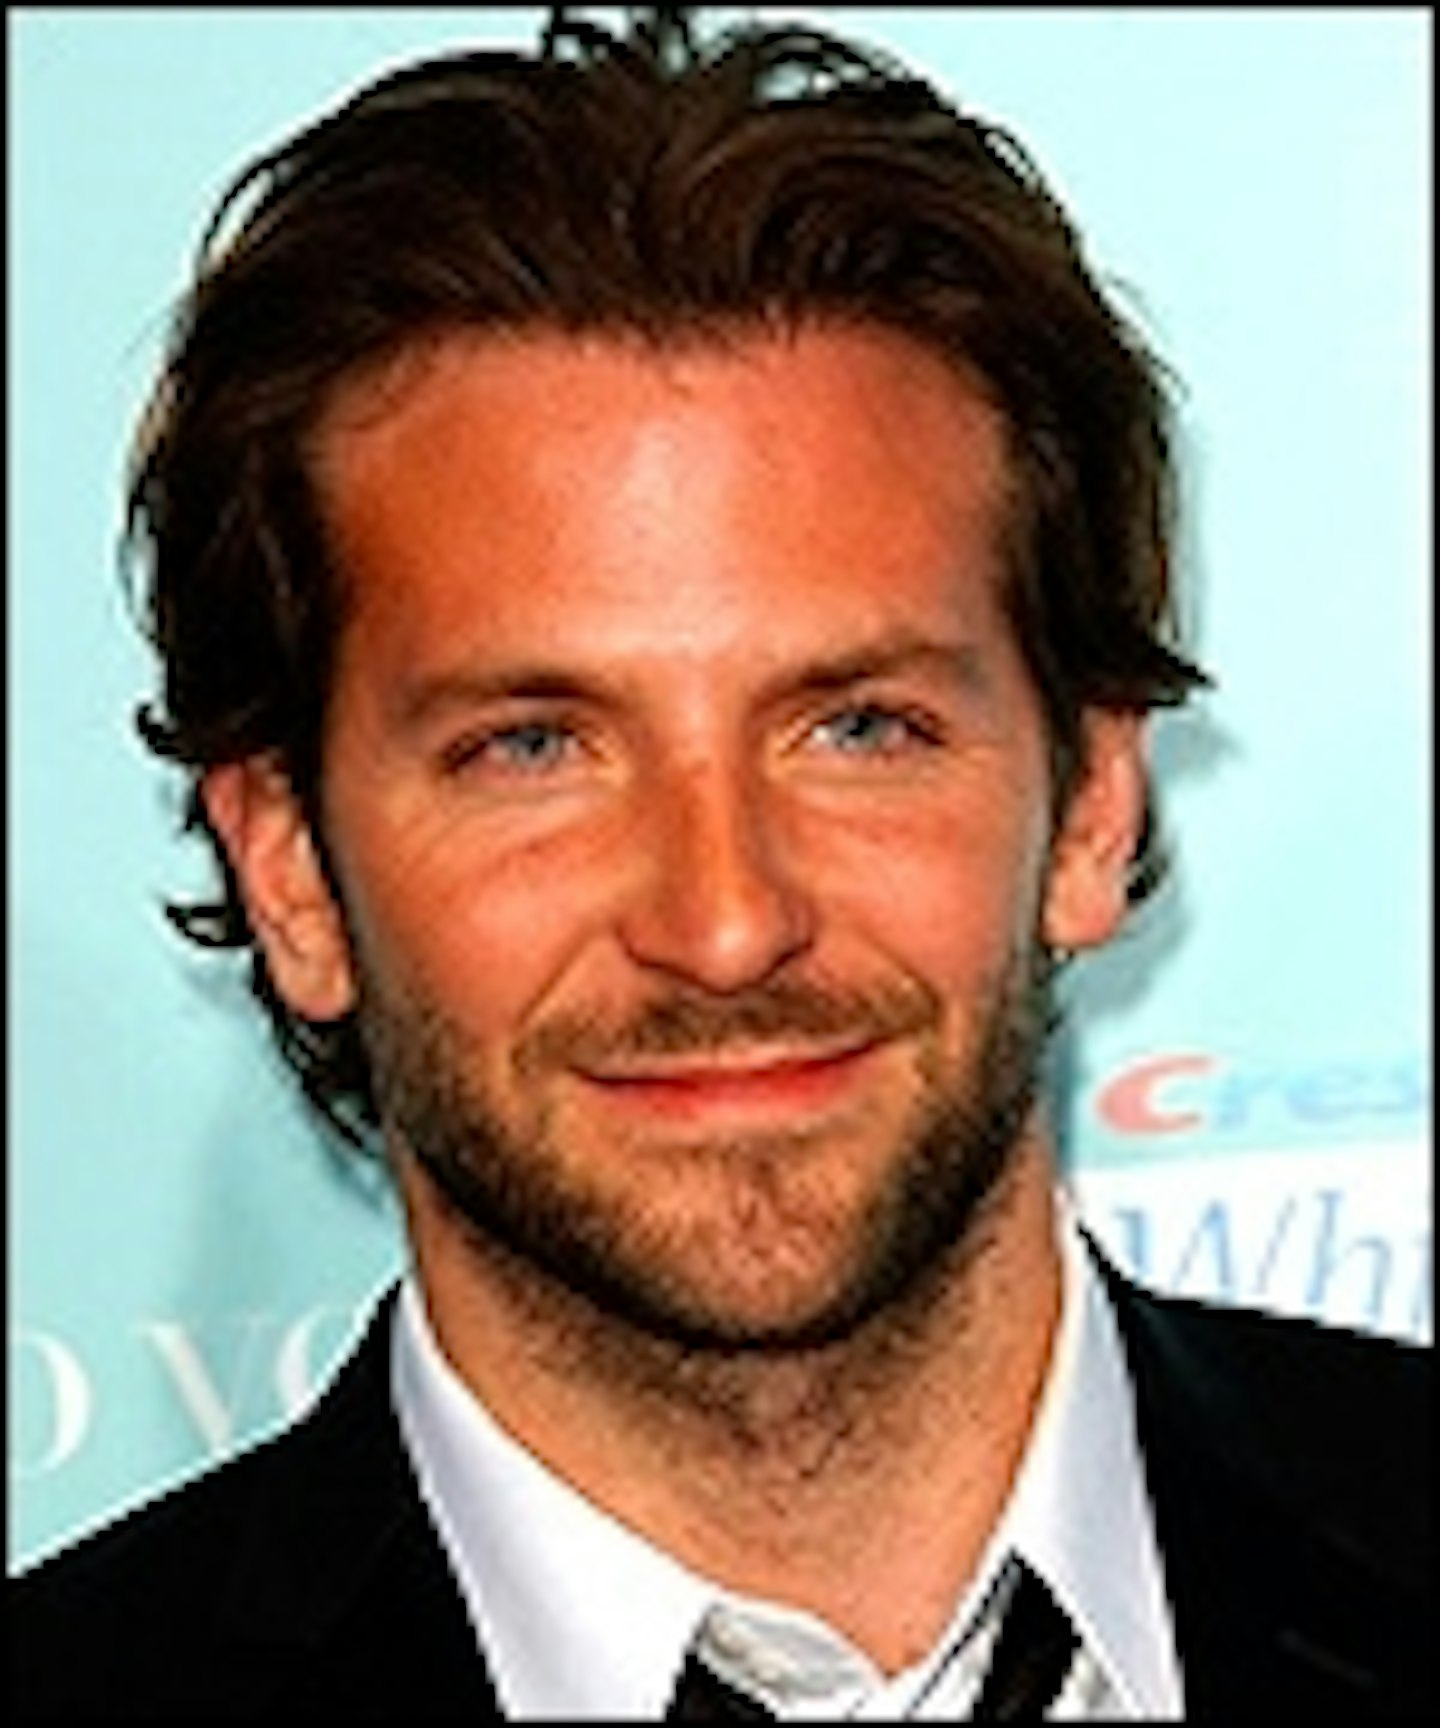 Bradley Cooper Looking To Be Lucifer